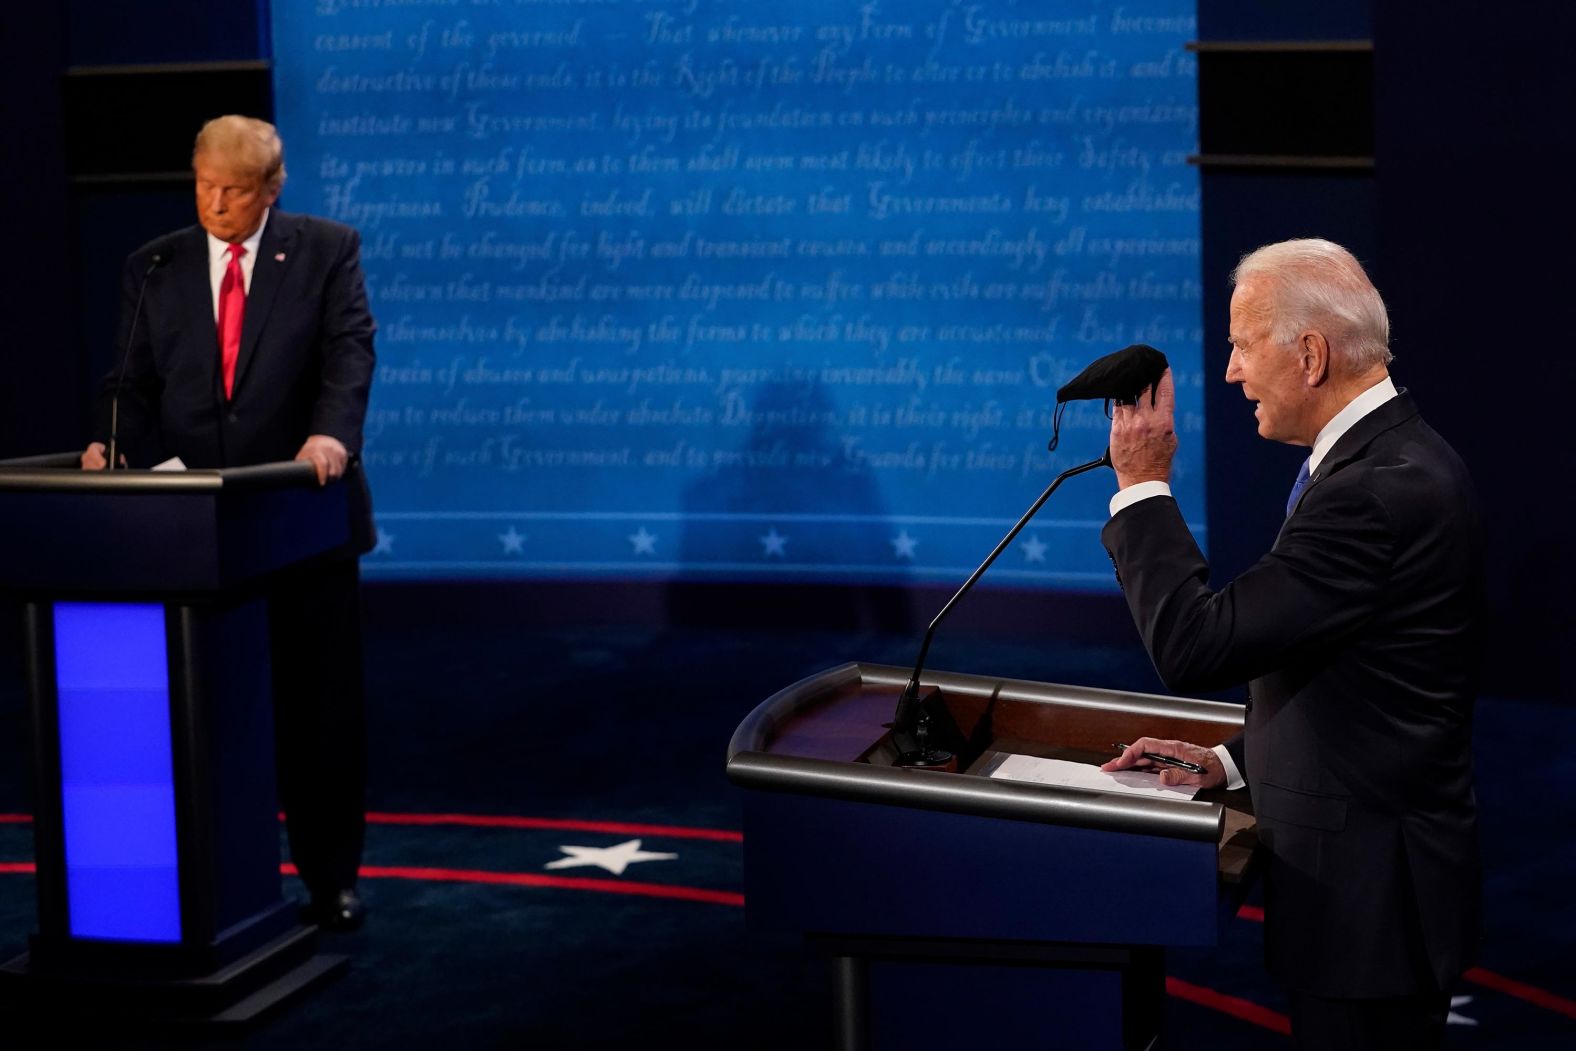 Biden holds up a mask as Trump takes notes during the debate section about the coronavirus.